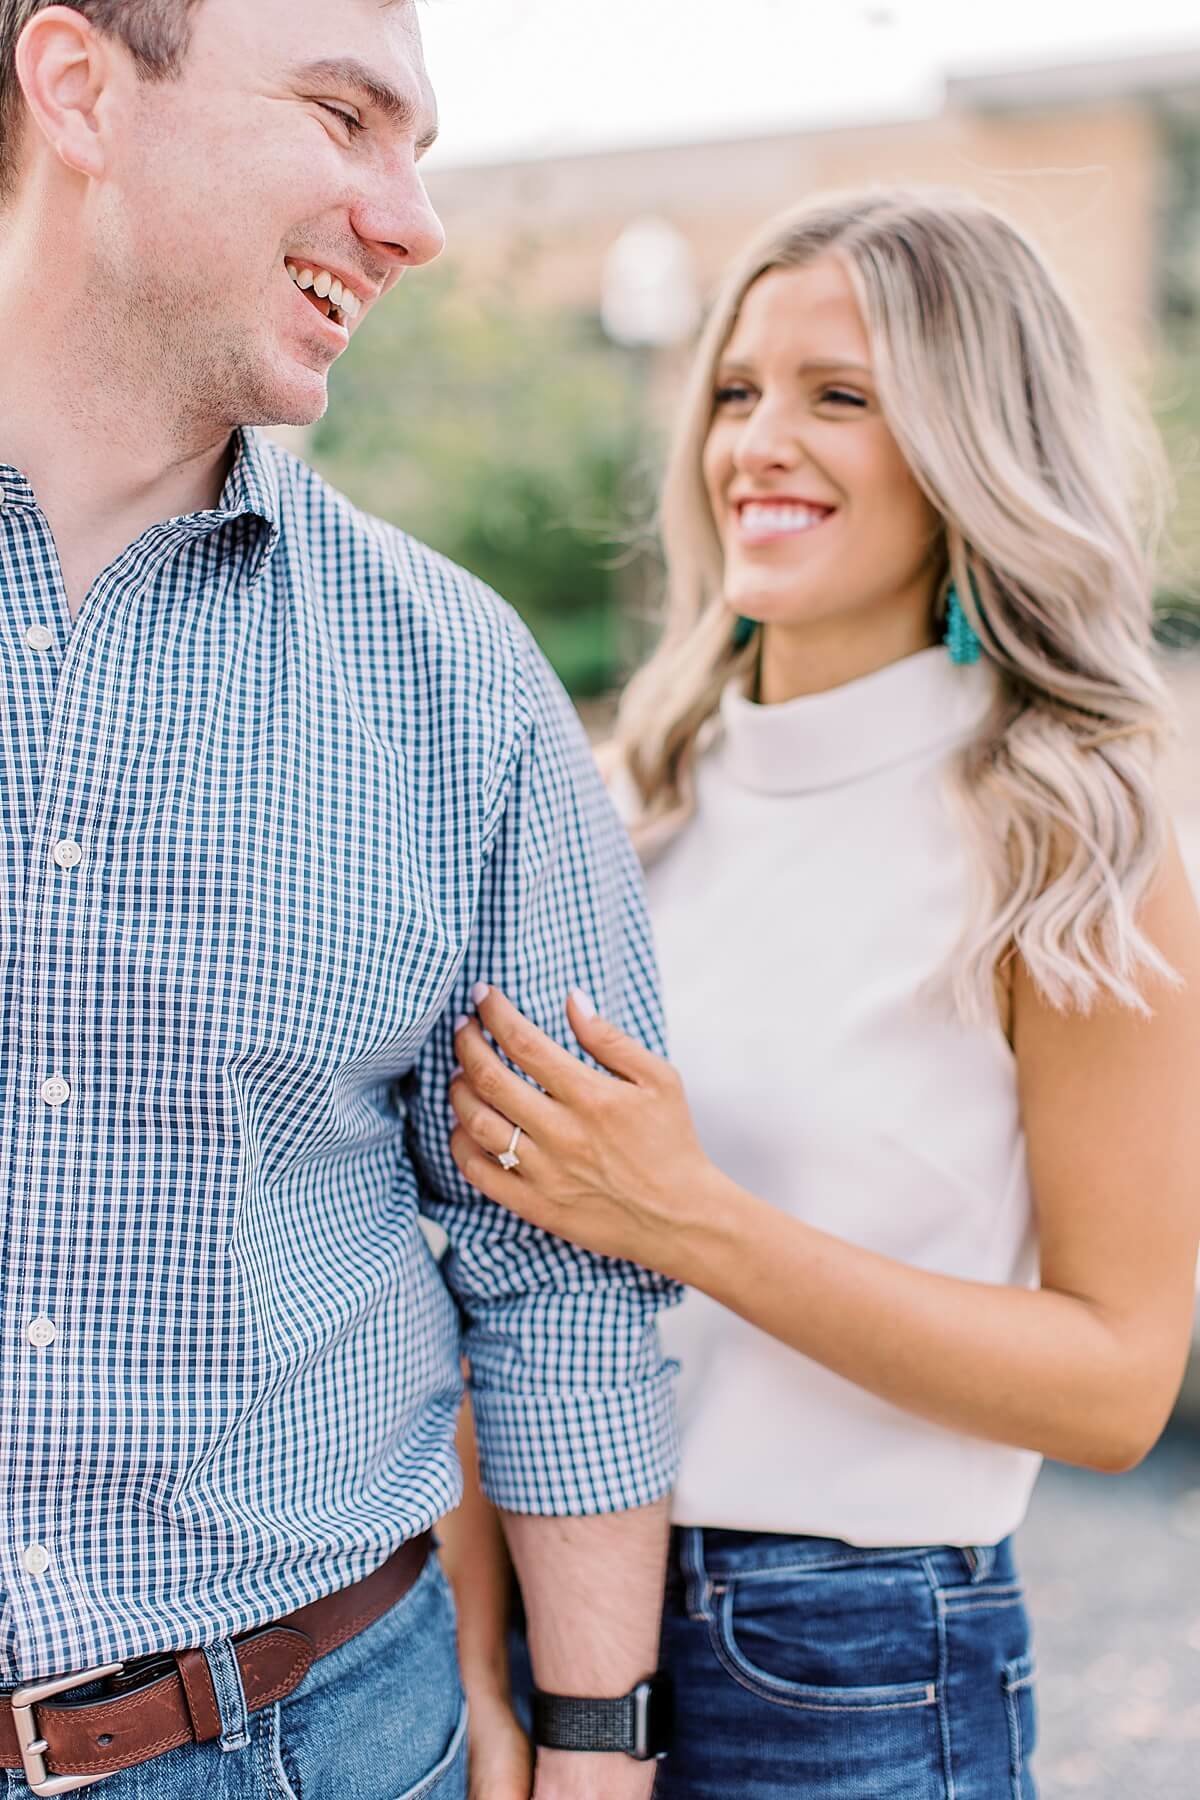 Engagement Session at Texas A&M by Houston Wedding Photographer Alicia Yarrish Photography_0018